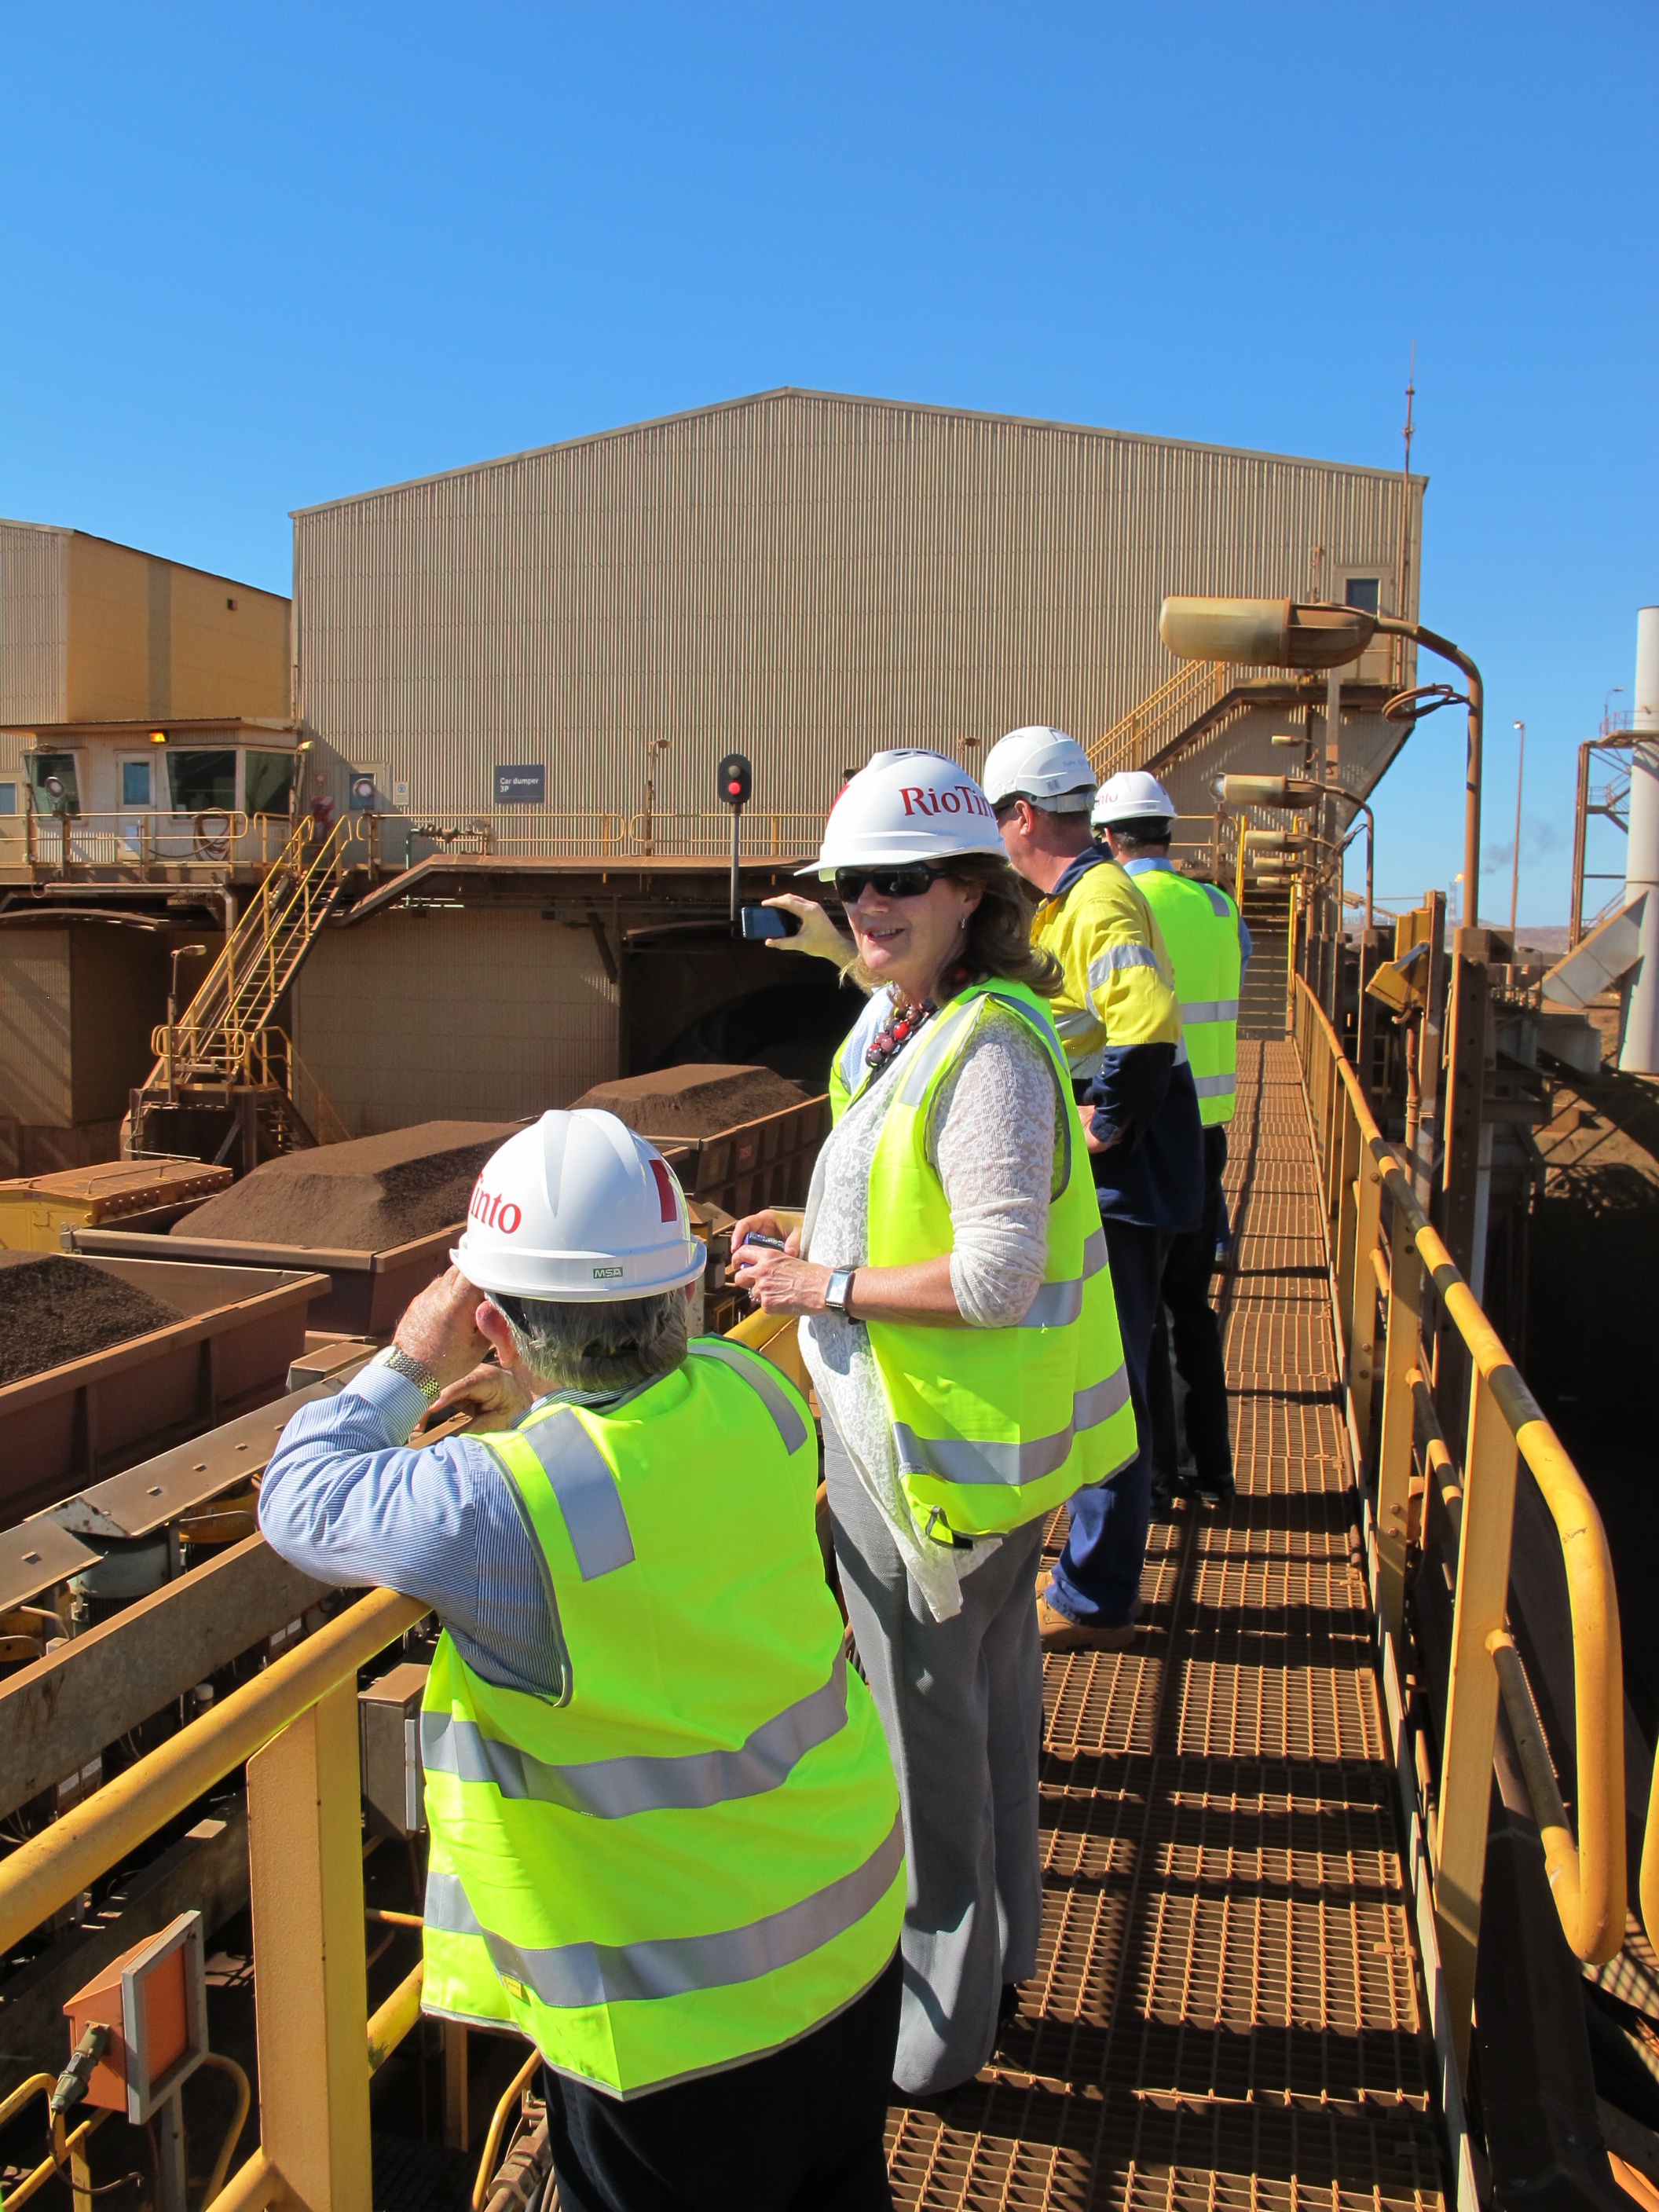 Committee members inspecting trains delivering iron ore extracted from mines in the Pilbara region to the Rio Tinto site at Dampier, 23 April 2013.